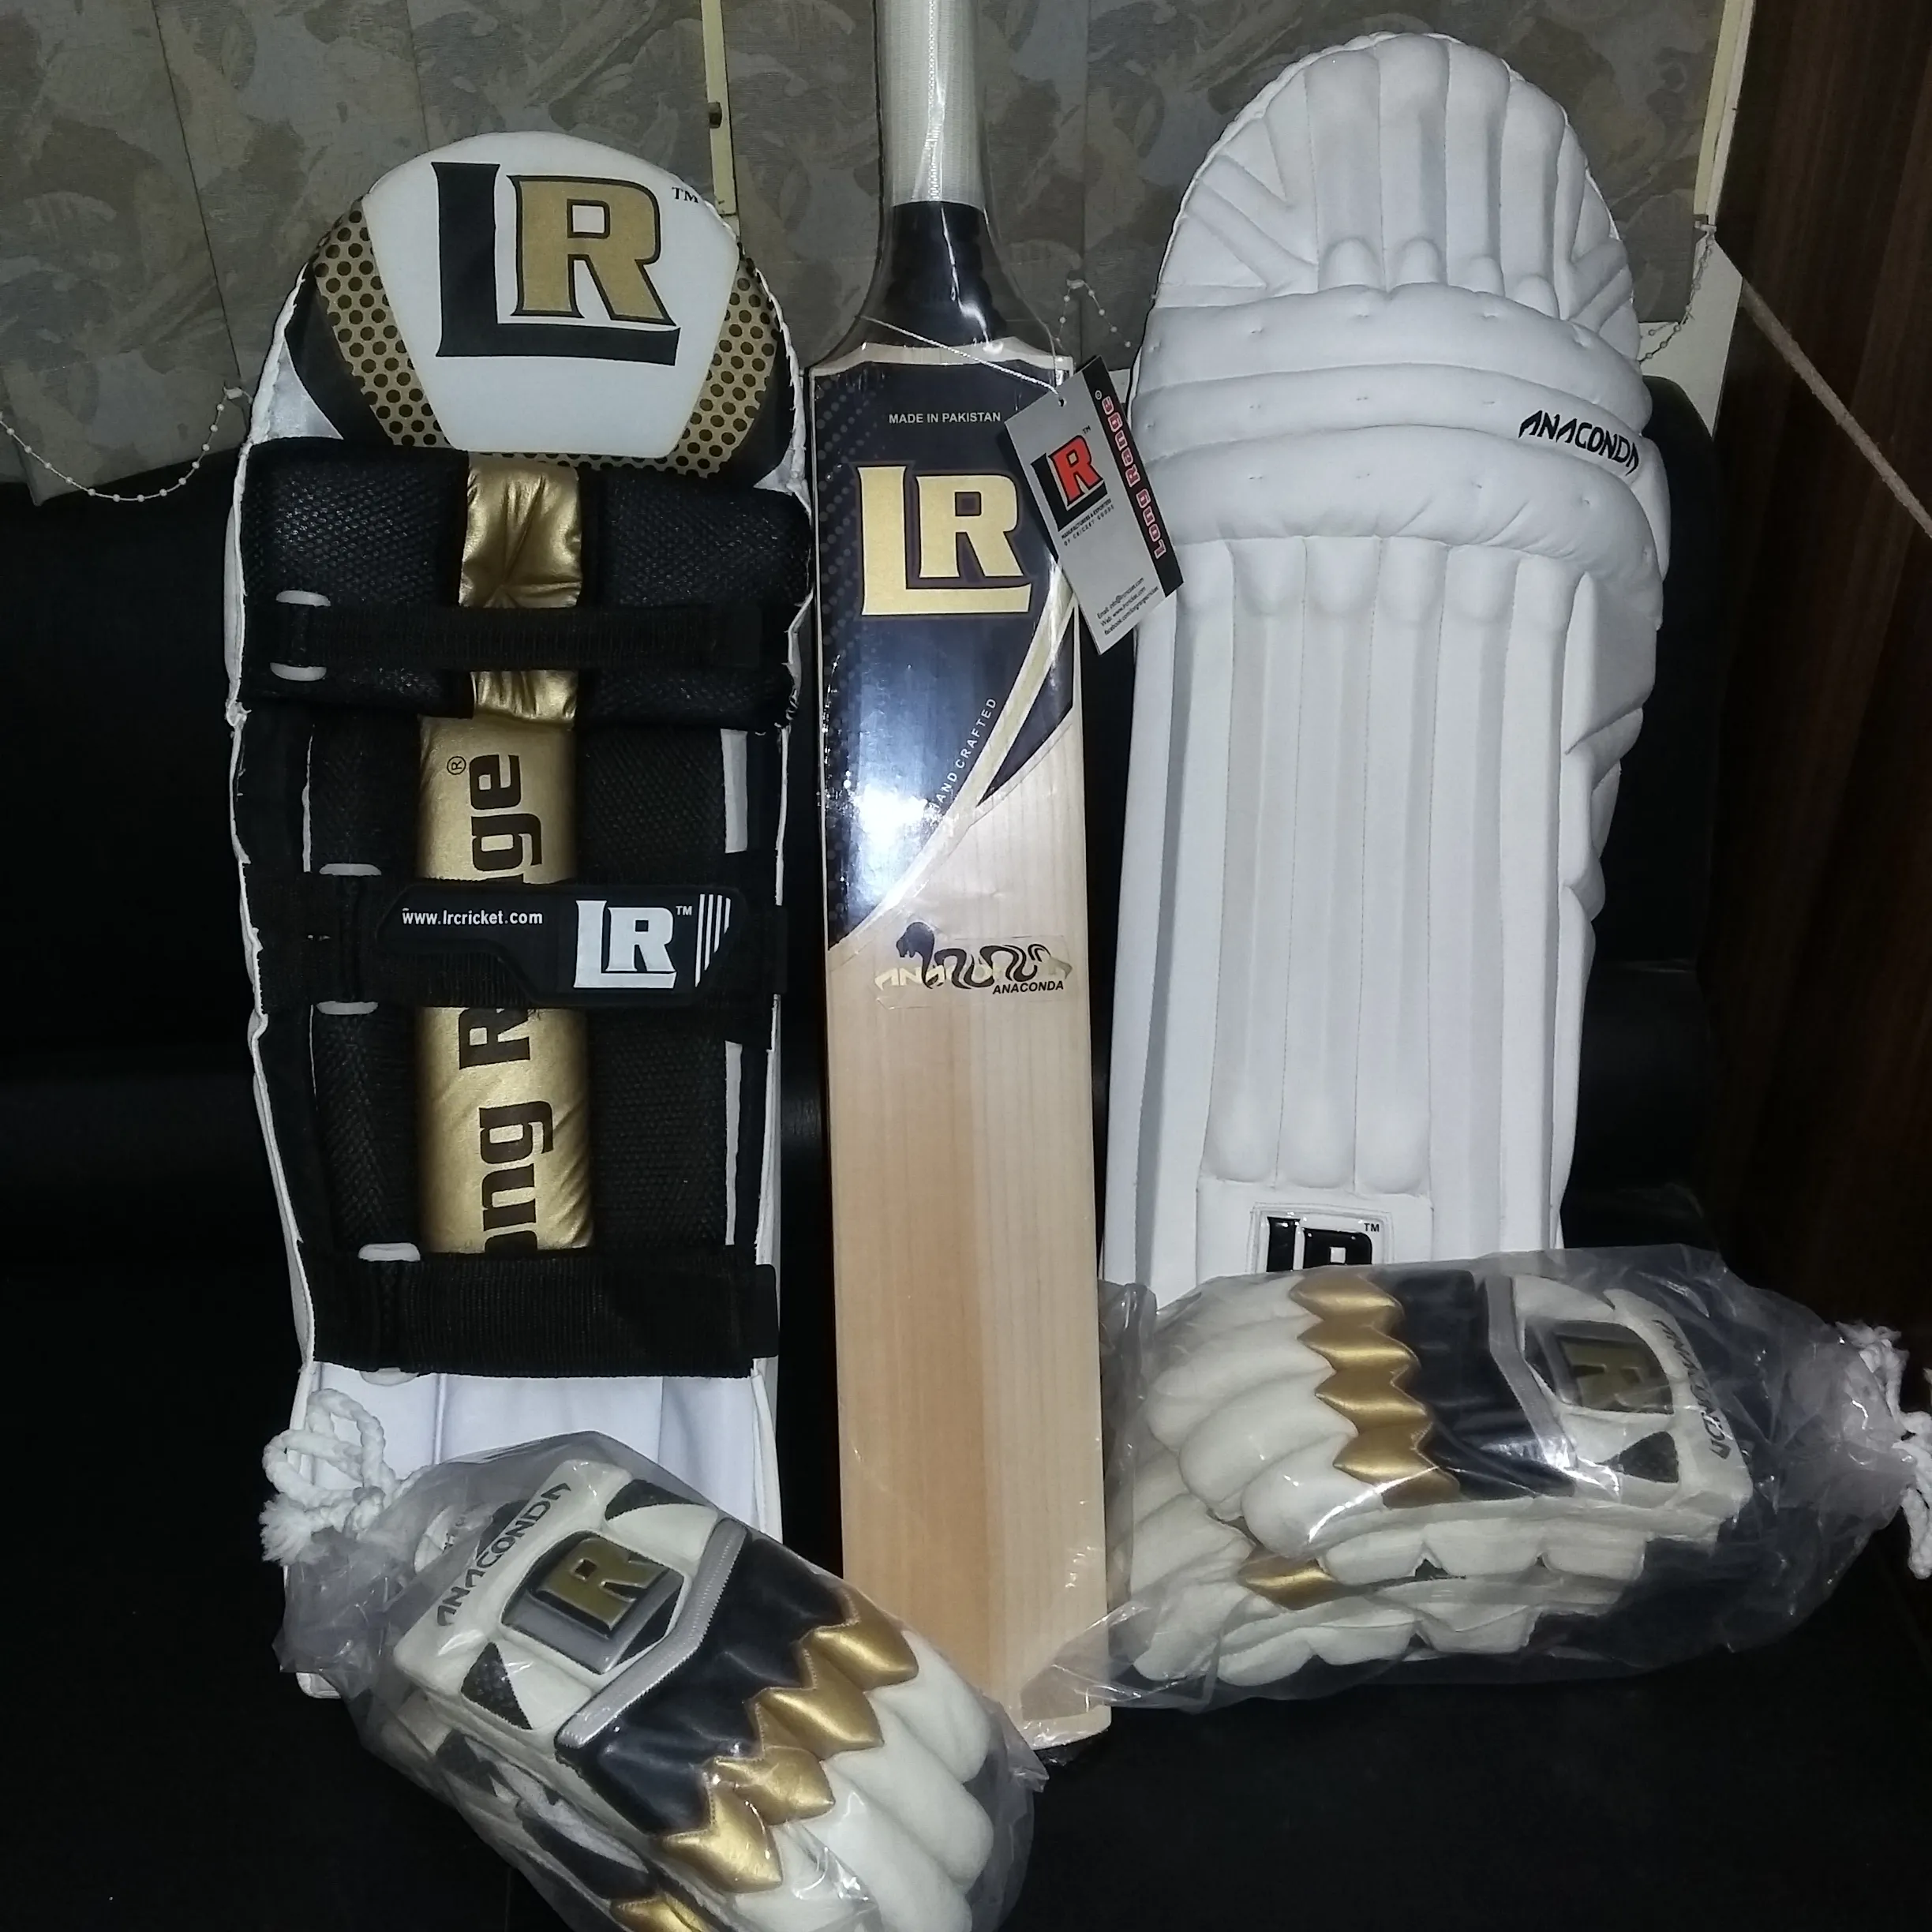 International Players Editions Full complete Kit Highly Protected Batting Pads, Gloves and English Willow Cricket Bat